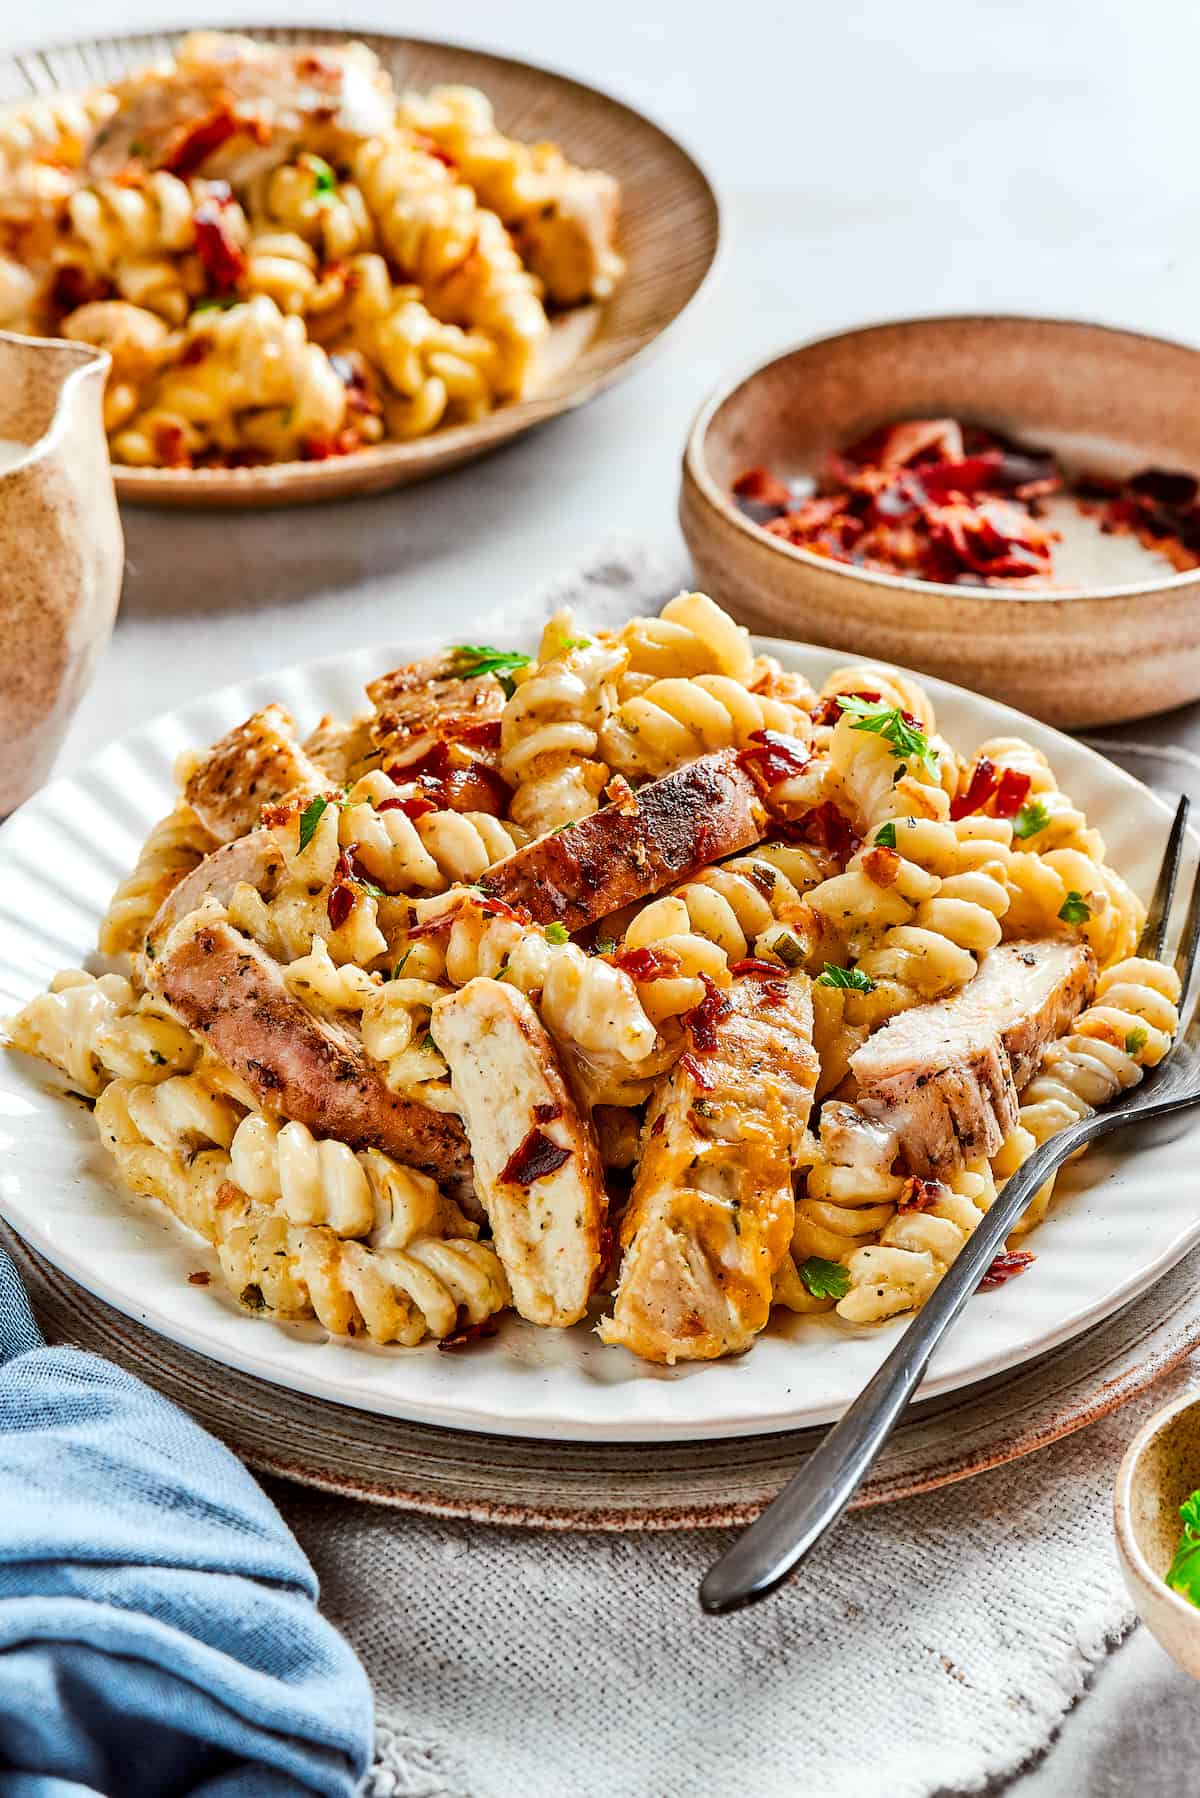 Plates of pasta with chicken.